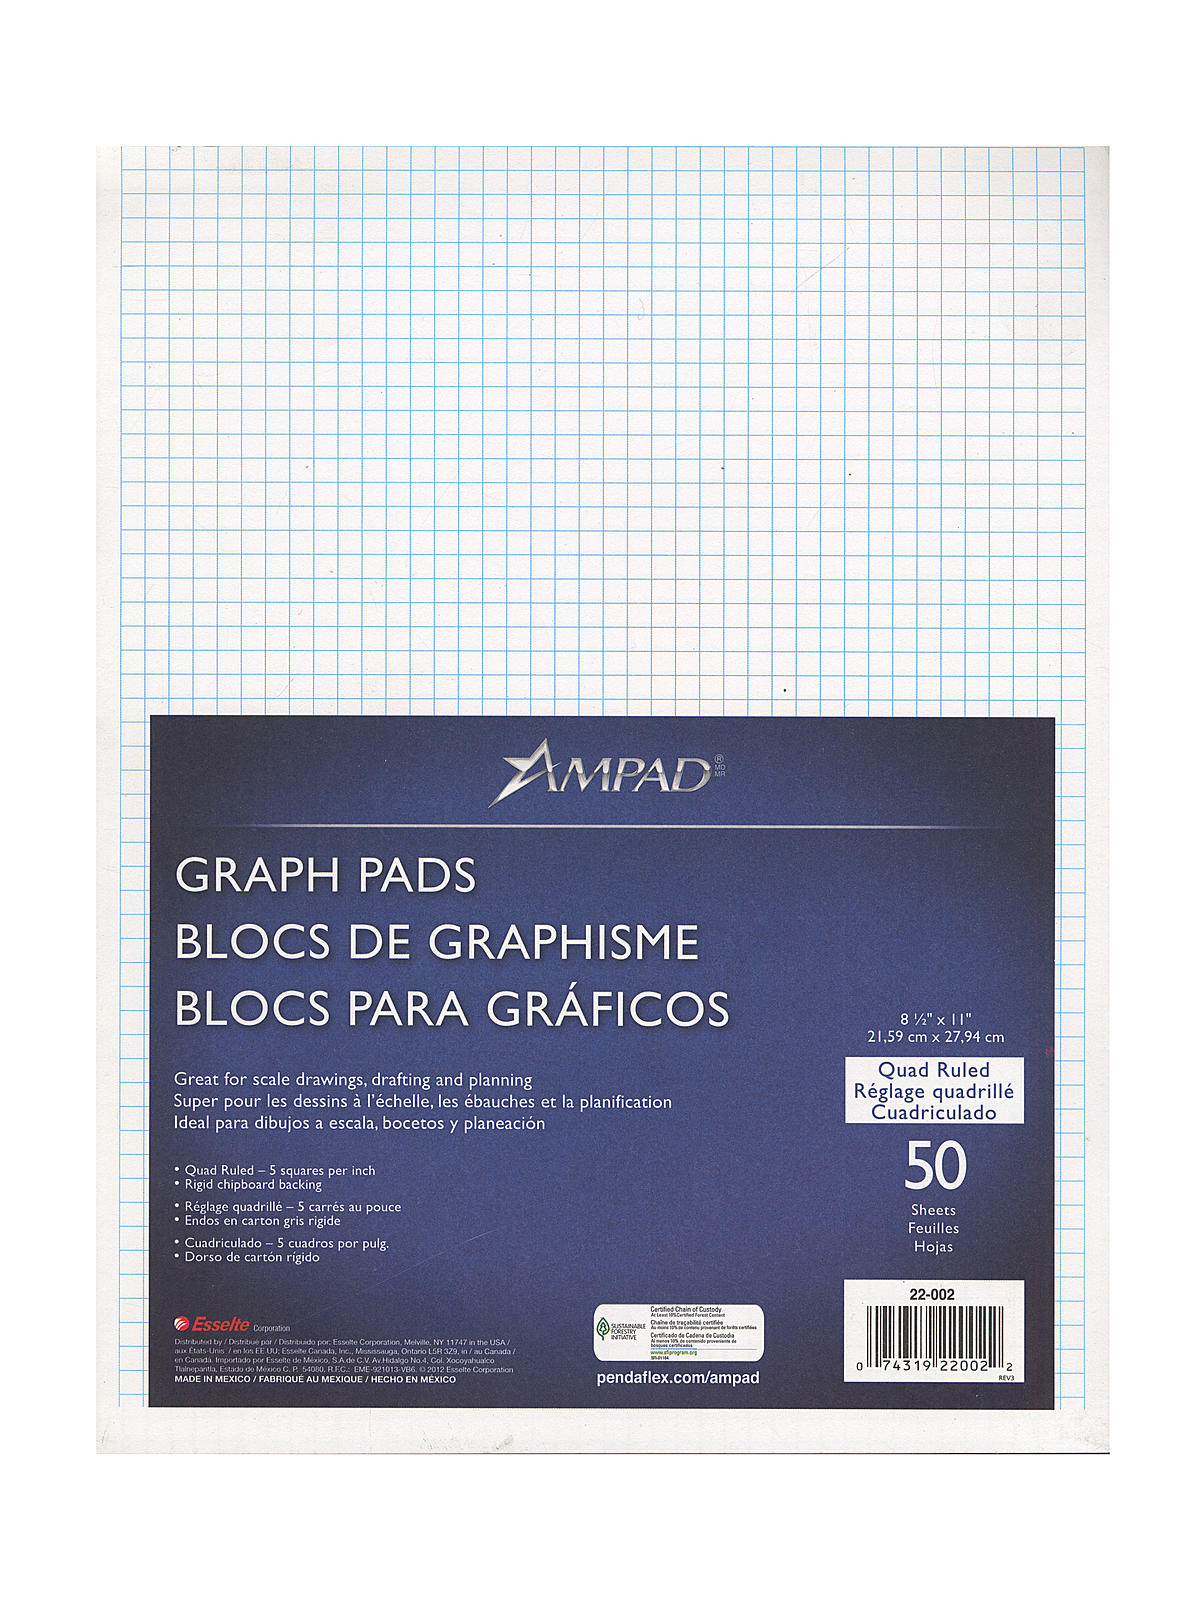 Evidence Quad Pads 5 X 5 8 1 2 In. X 11 In.